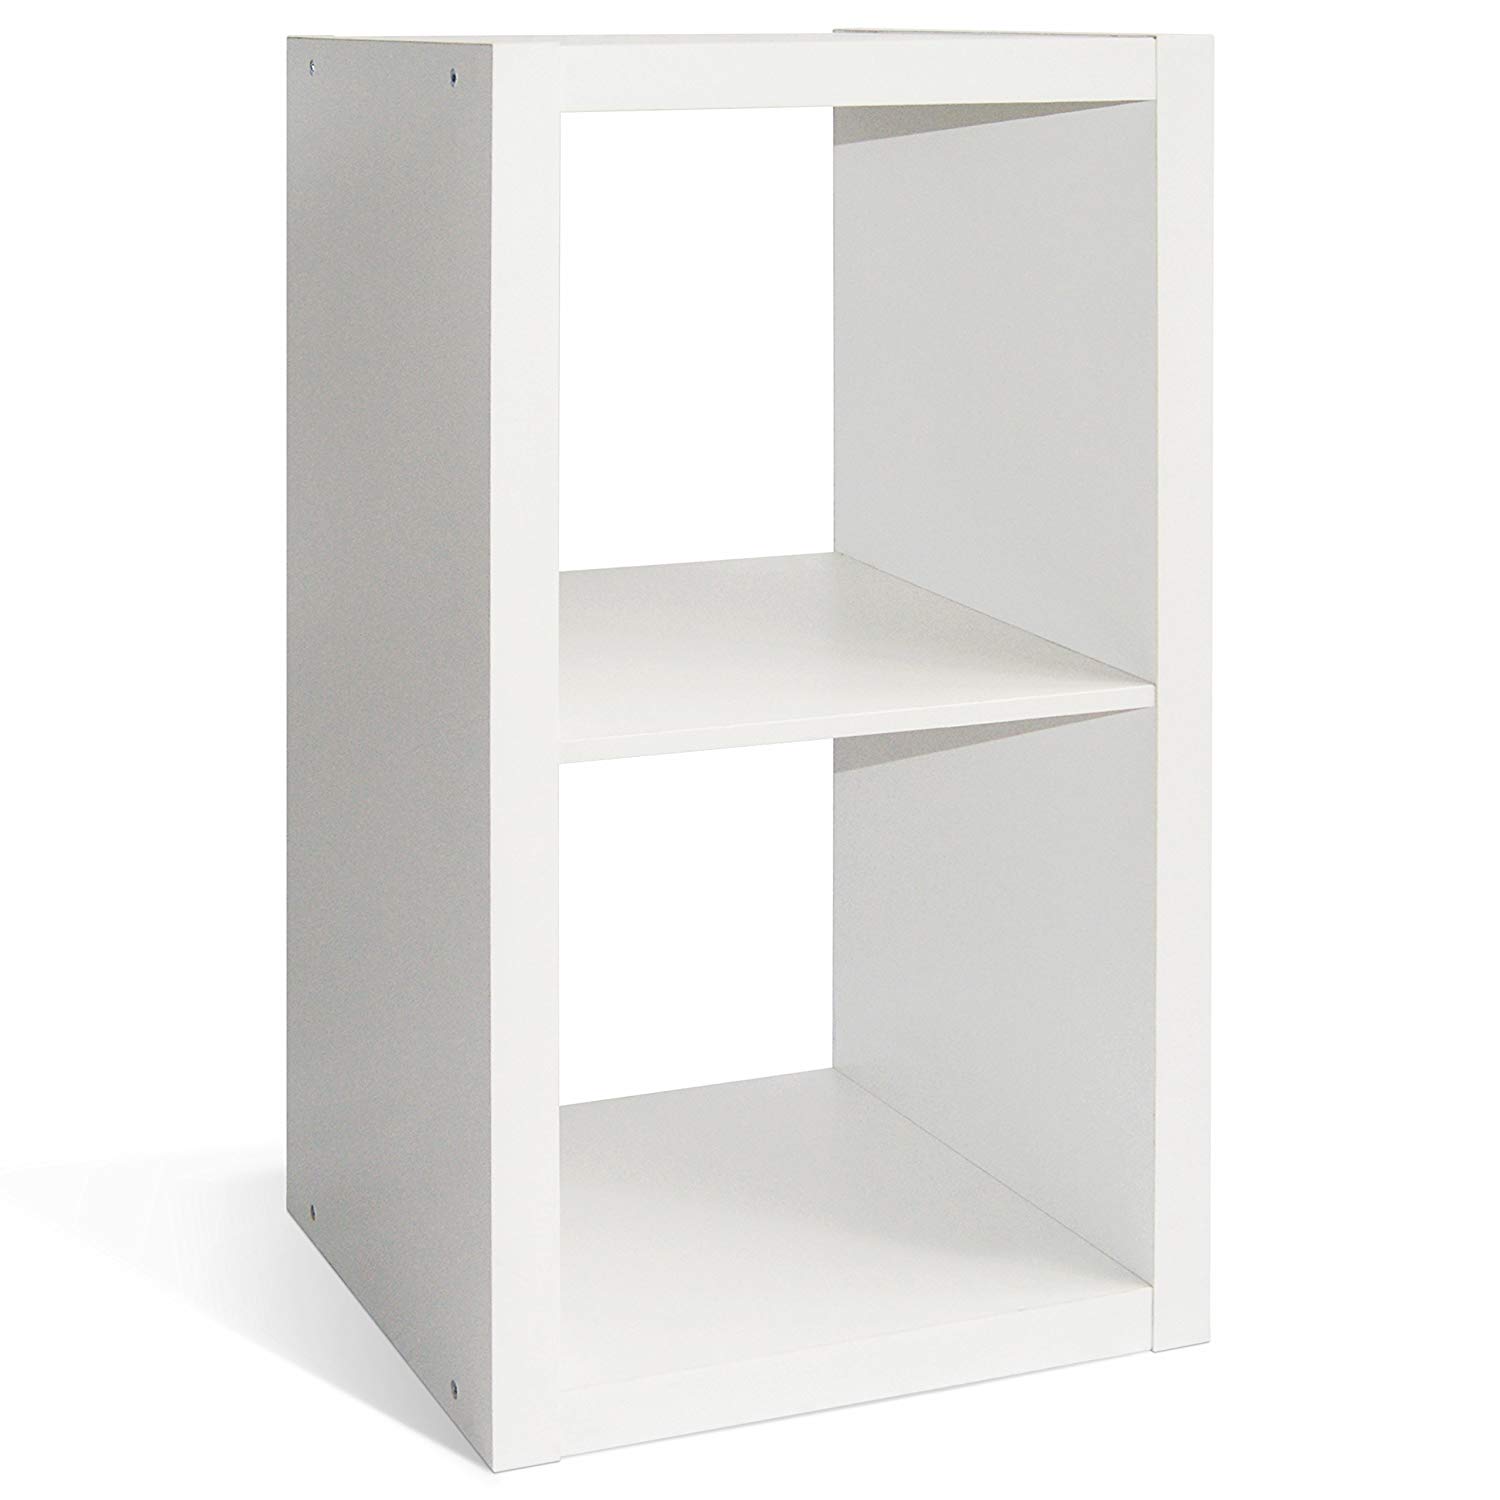 Cap Living 2 4 6 Cube Room Organizer Storage Divider Extra Thick Exterior Bookcase Colors Available In Espresso And White